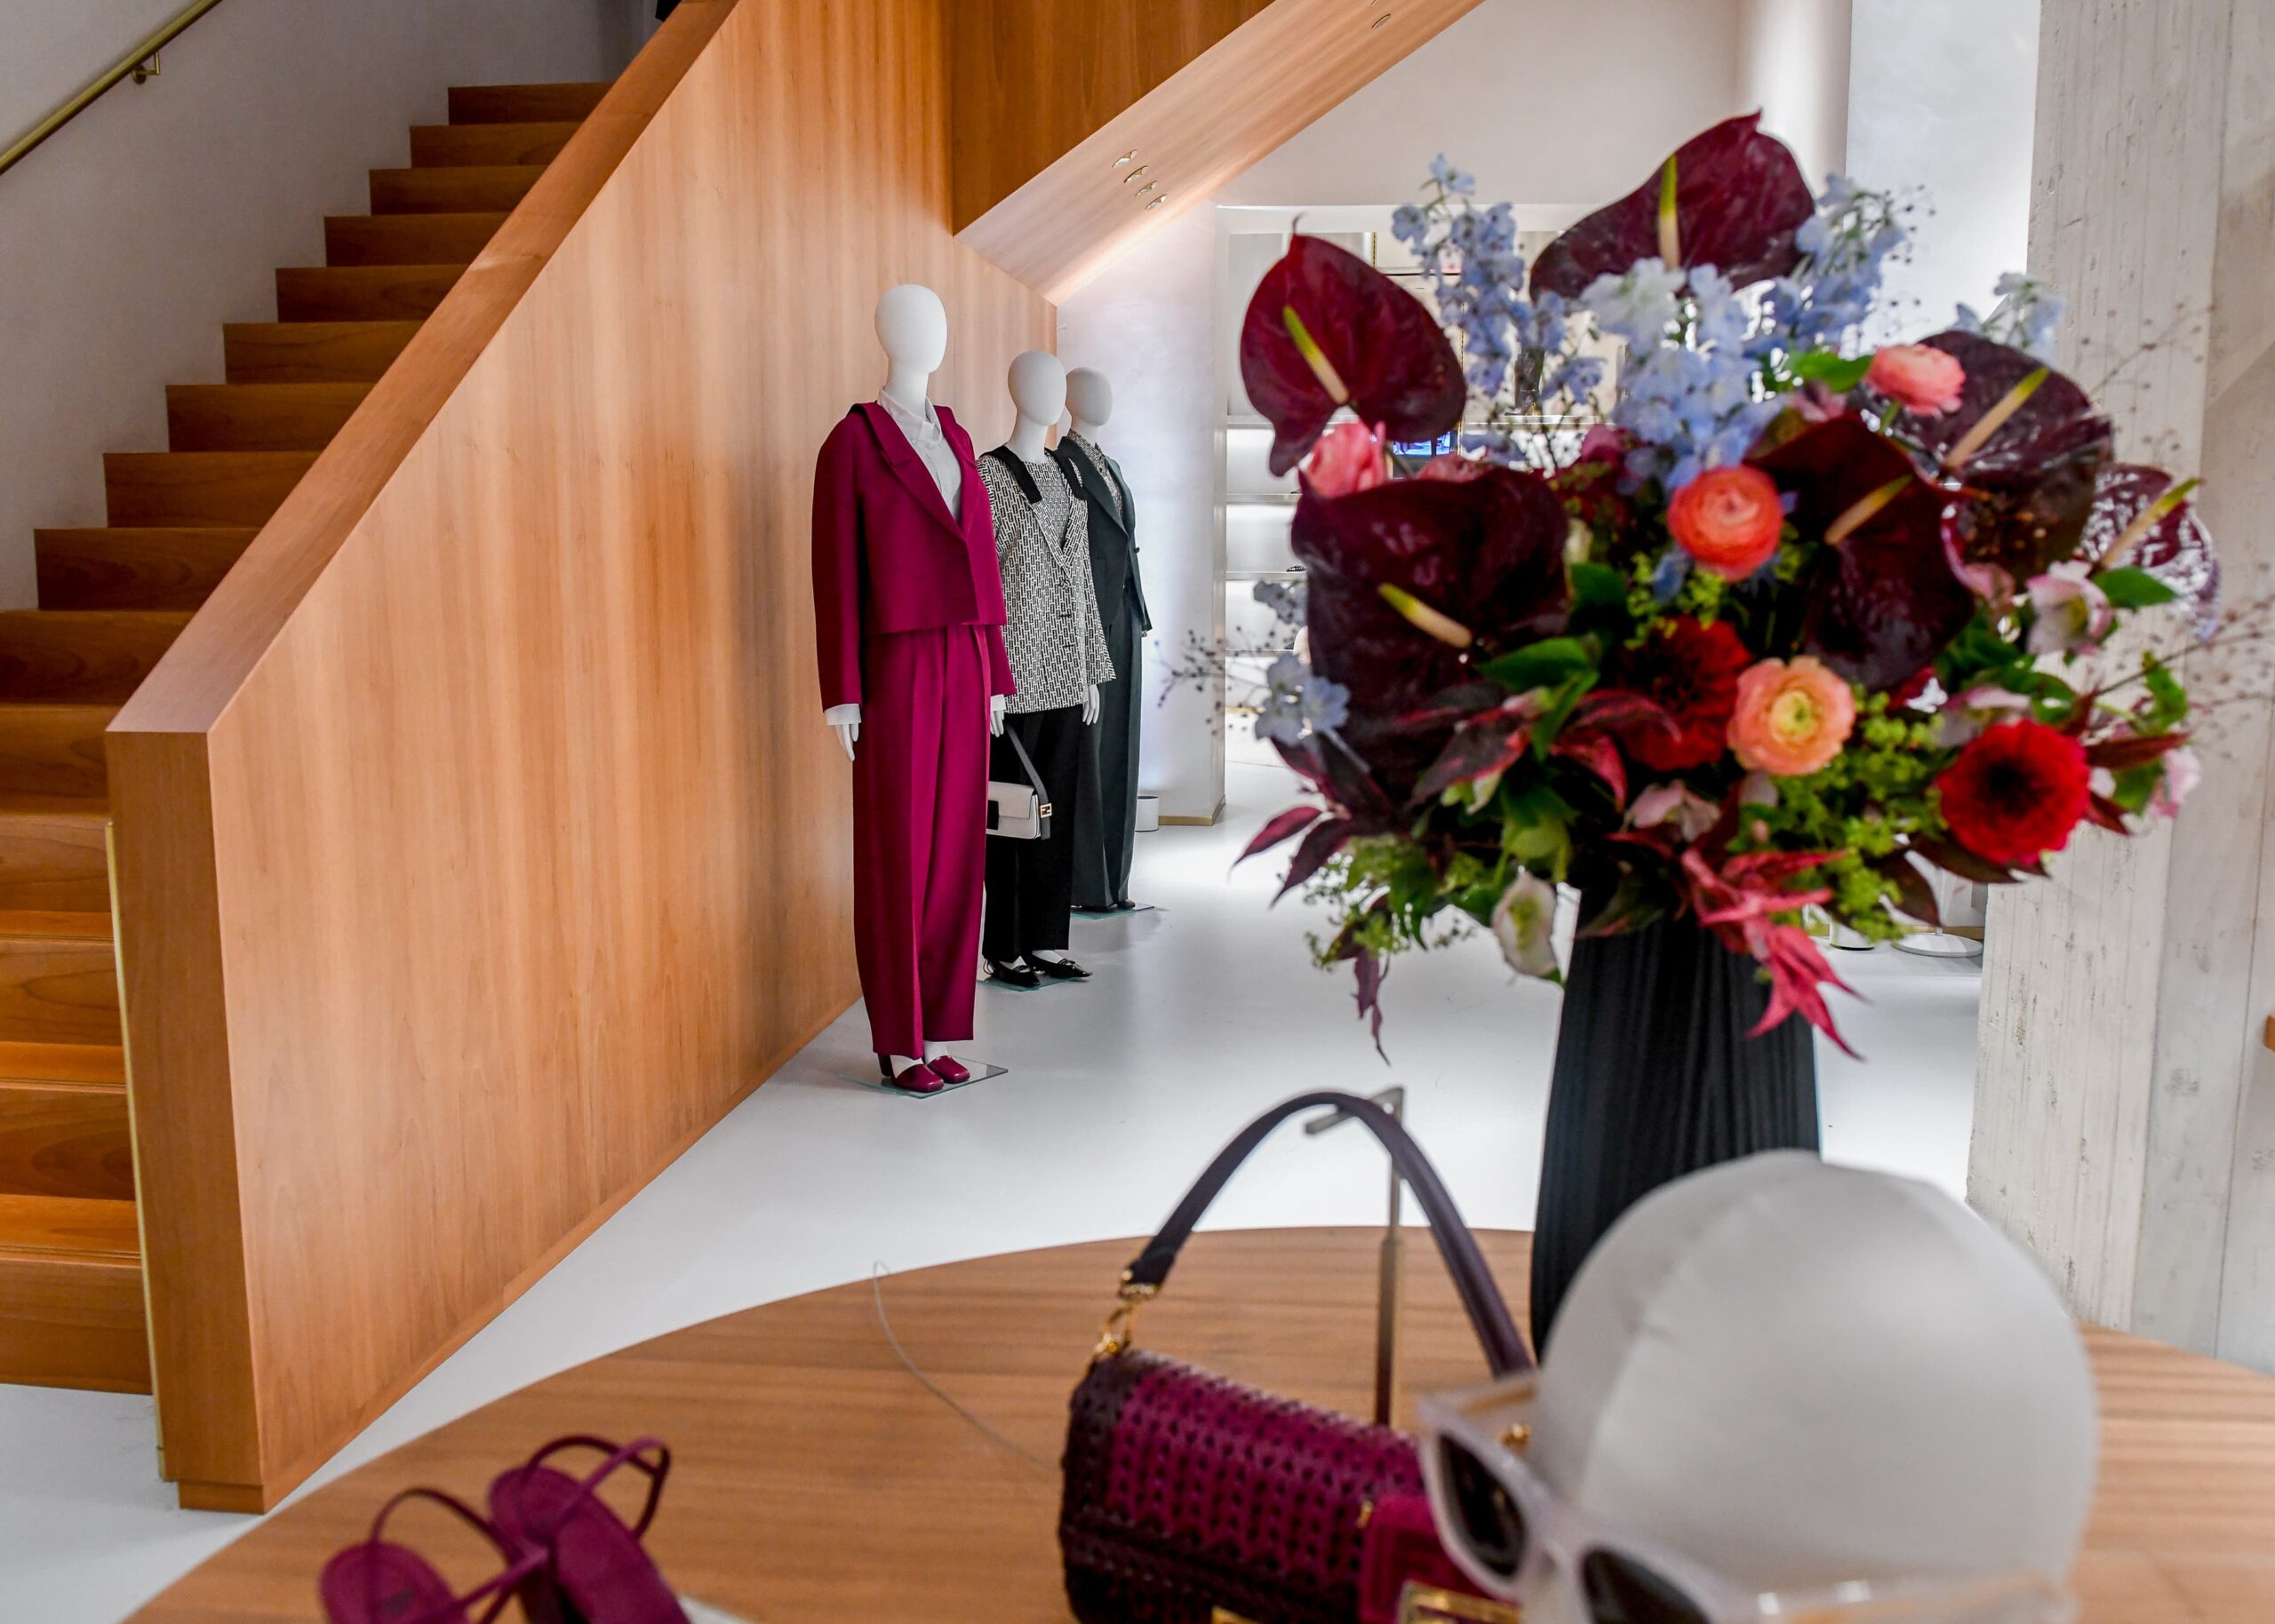 Inside a modern boutique, mannequins display designer outfits next to a wooden staircase, with a foreground of vibrant floral arrangements and luxury handbags.